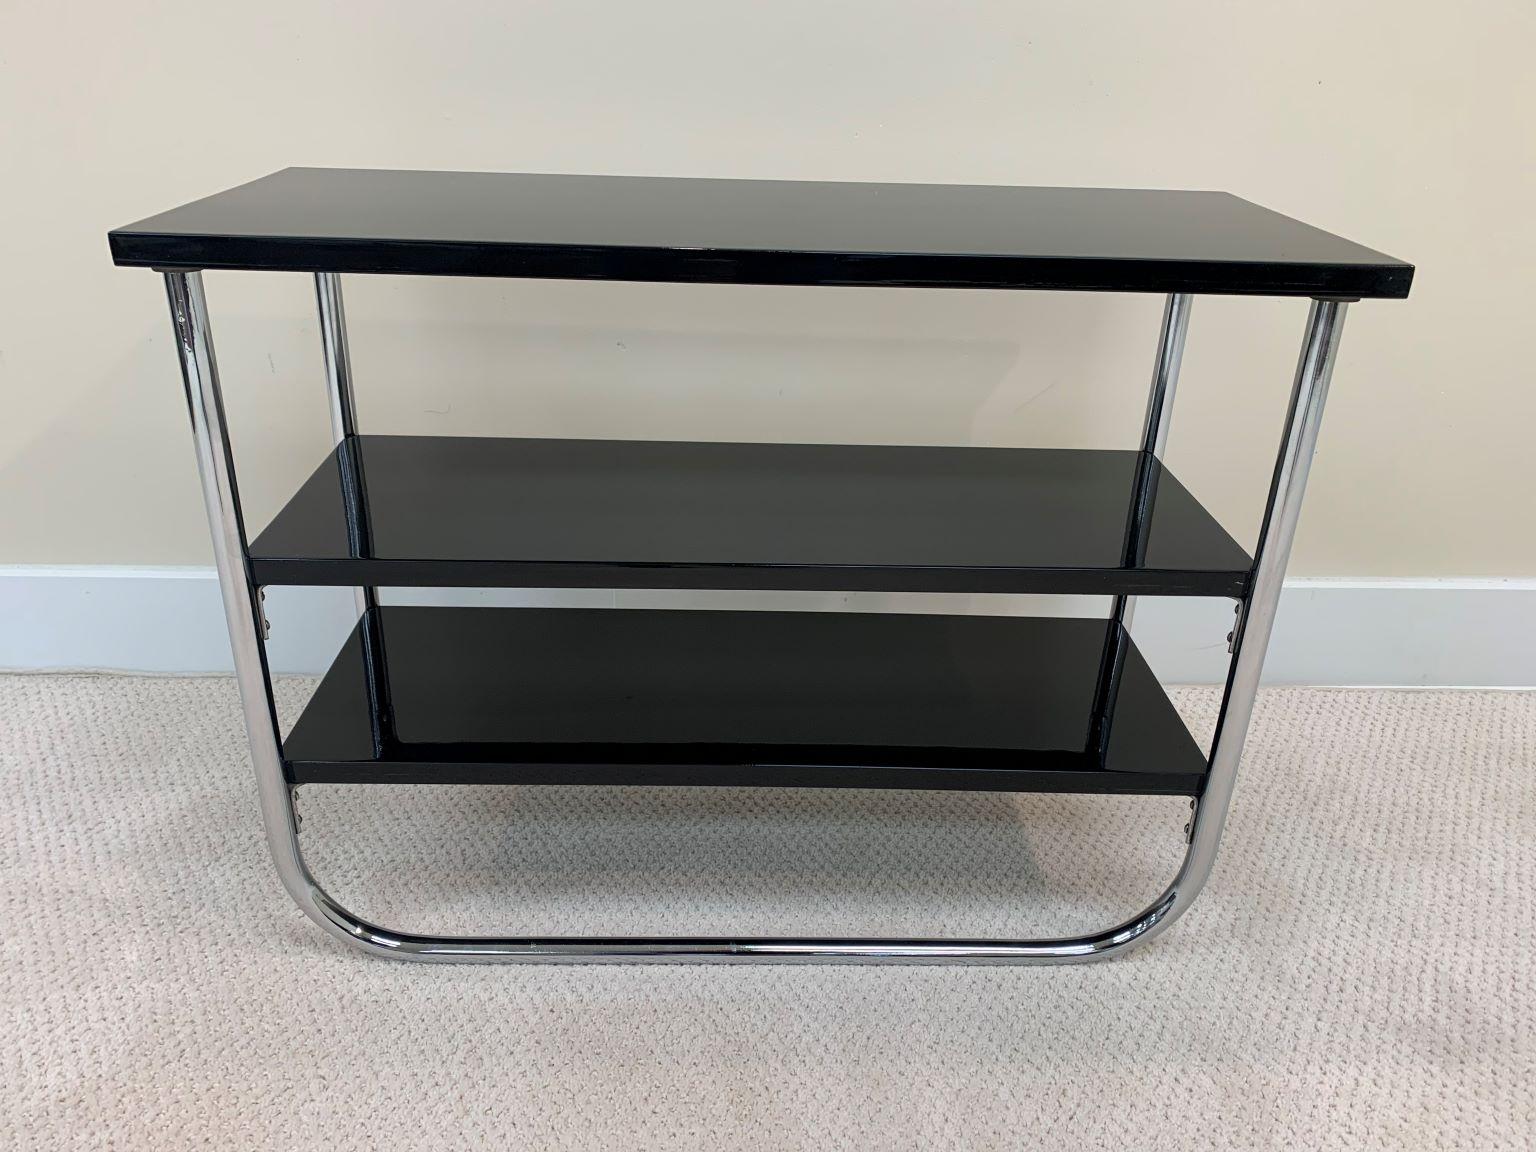 A beautiful three-tiered polished chromed and black lacquered table by Wolfgang Hoffman. Wolfgang Hoffman designed this elongated side table for the Howell Furniture Company in 1937, model number 419. Expertly restored. Reference in Howell’s 1937